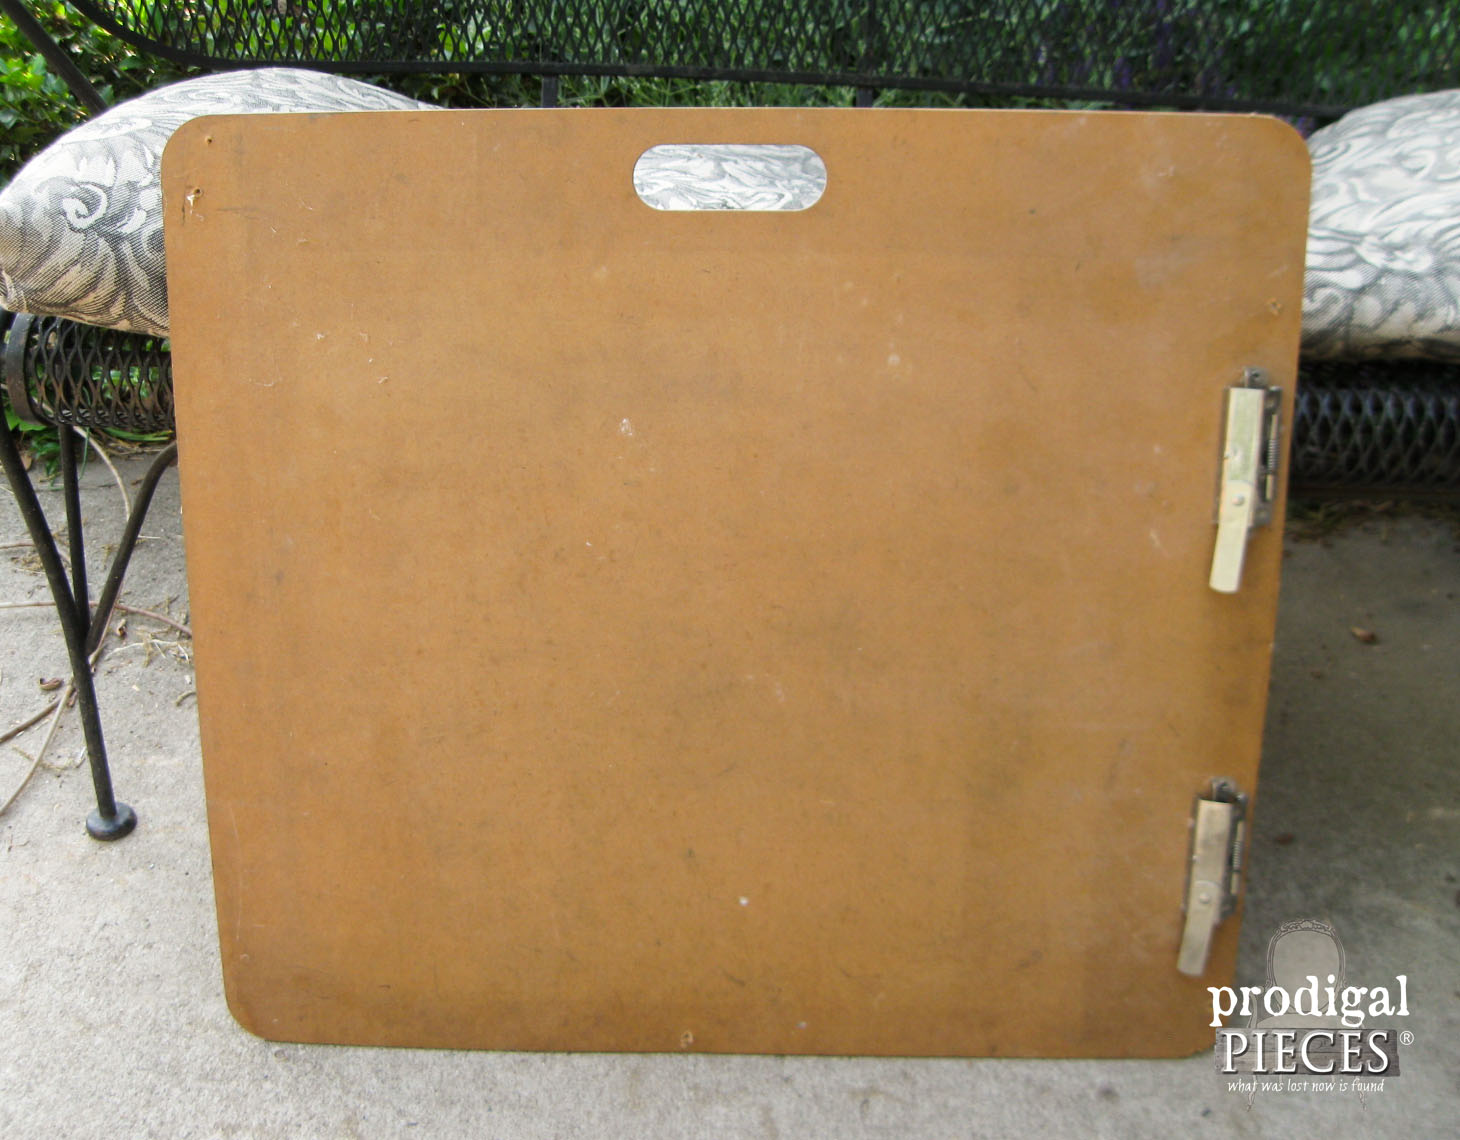 Artist's Clipboard Found Curbside Before Makeover | Prodigal Pieces | prodigalpieces.com